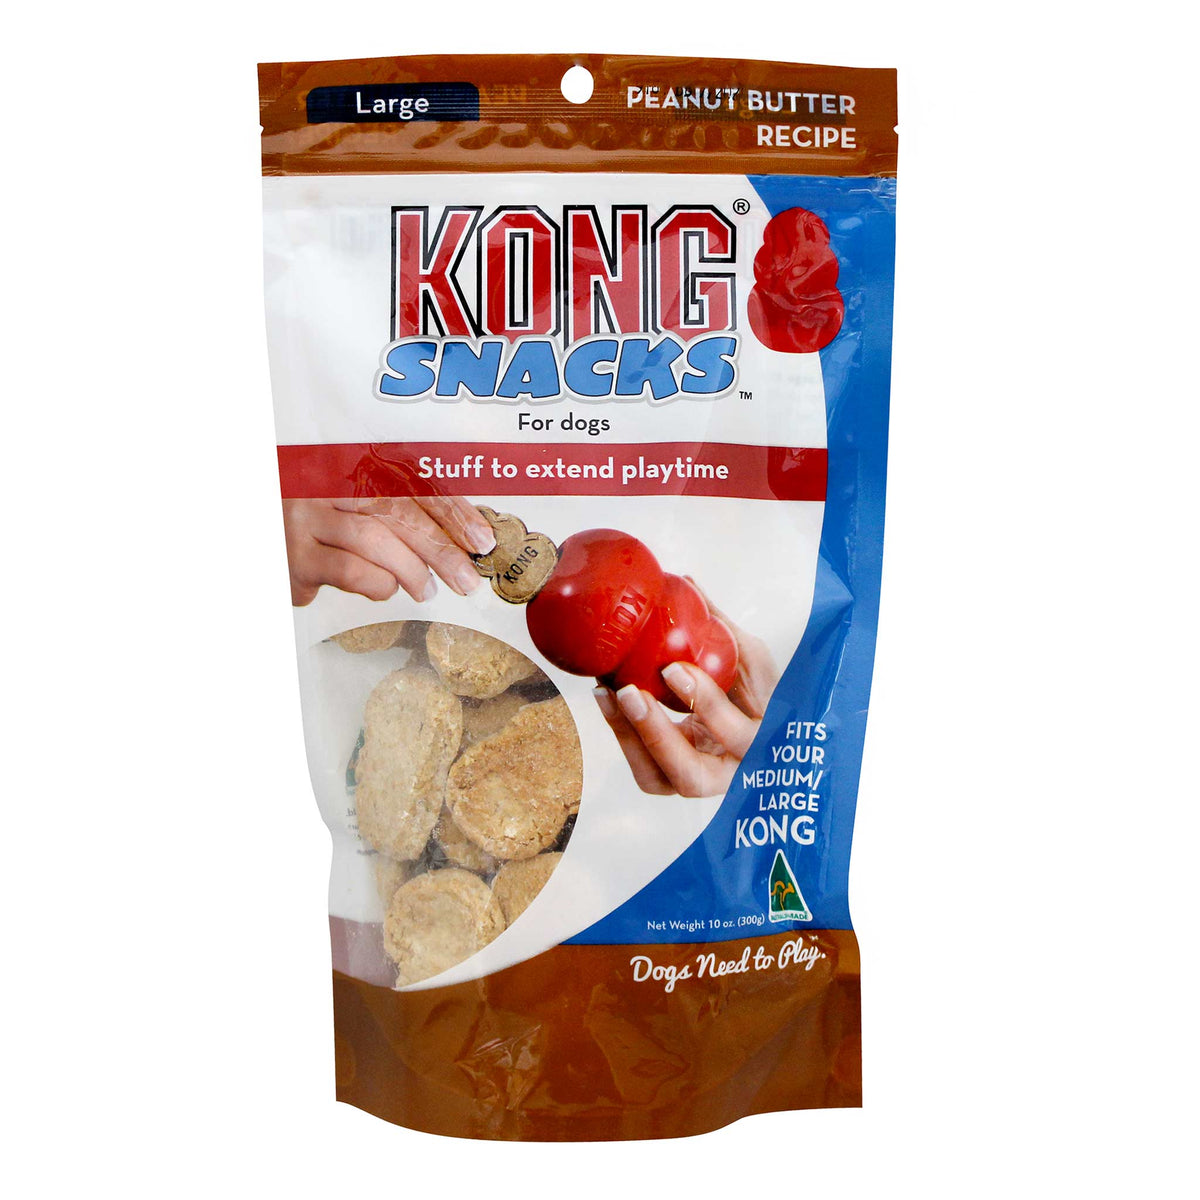 KONG Snacks for Dogs